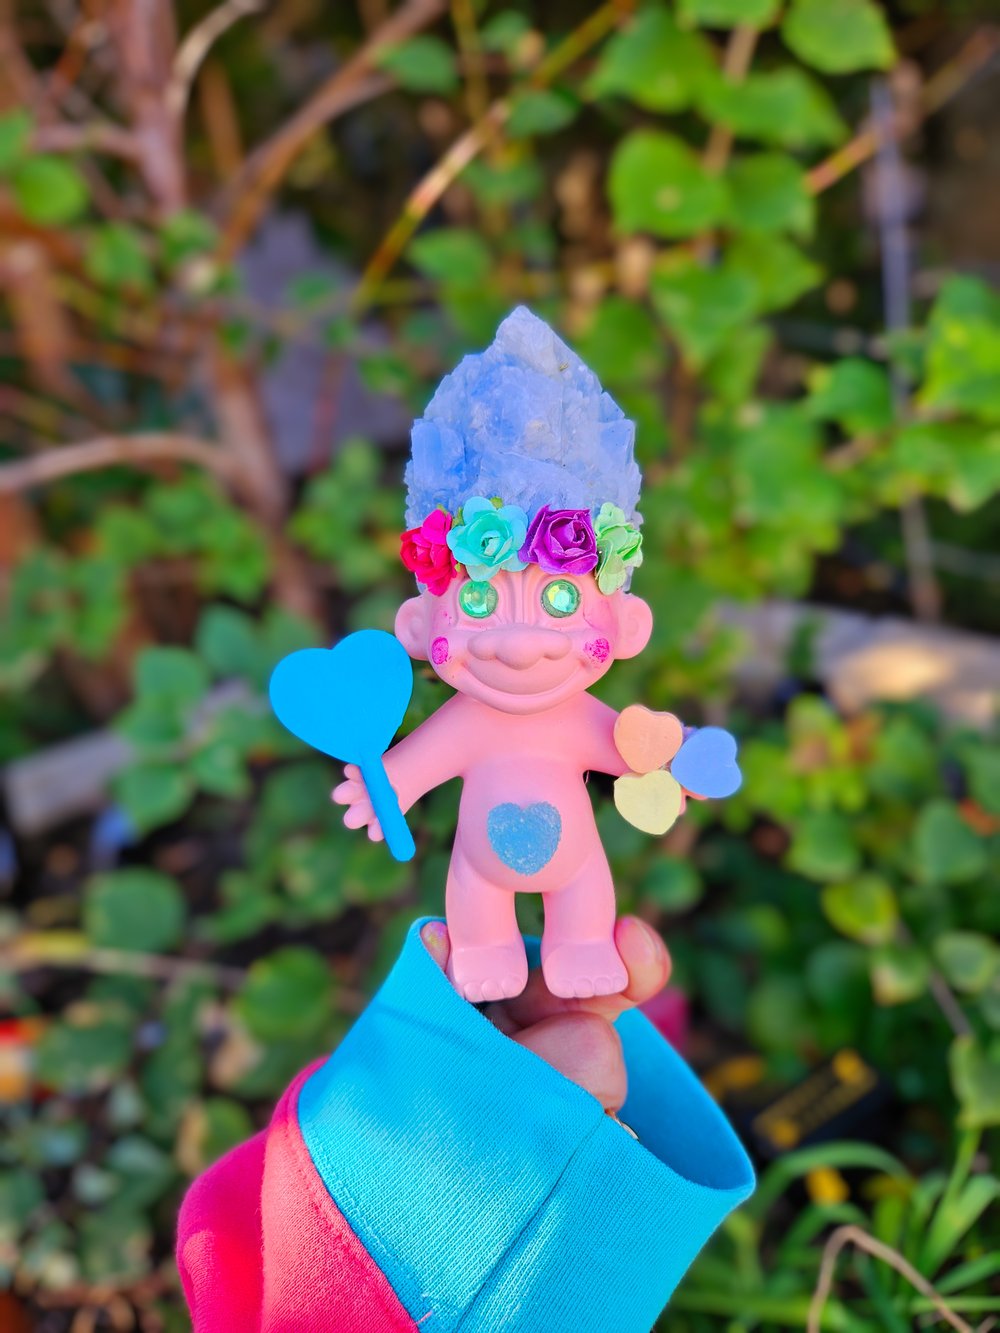 Blue Calcite Candy Heart Troll with Blue Personalized Candy Heart MSG 6"